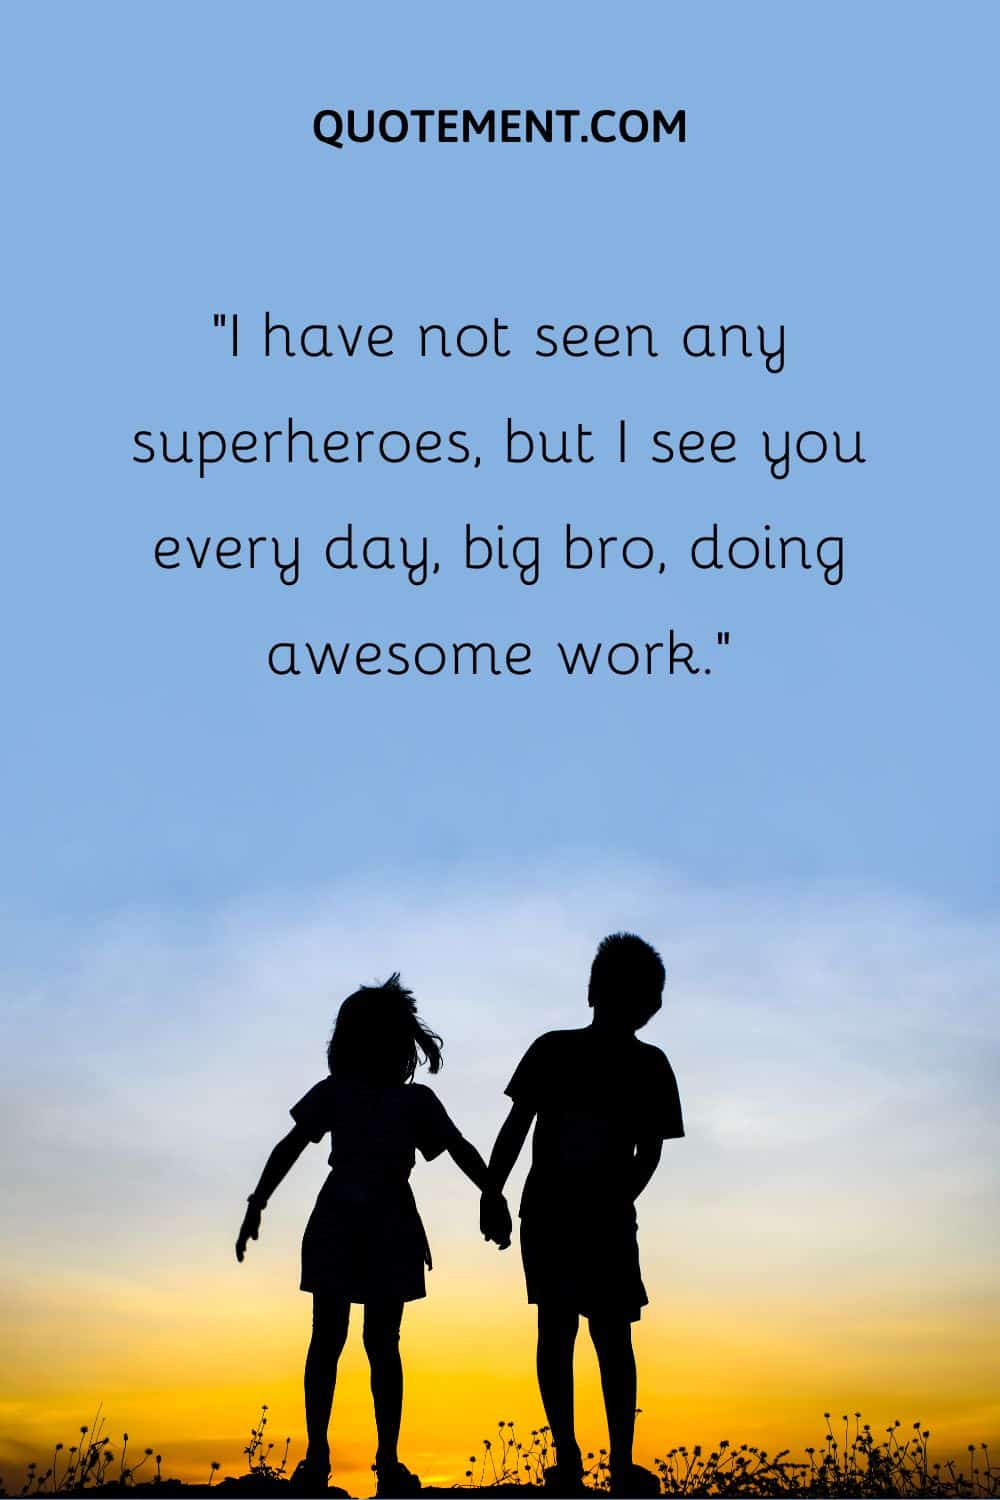 “I have not seen any superheroes, but I see you every day, big bro, doing awesome work.”